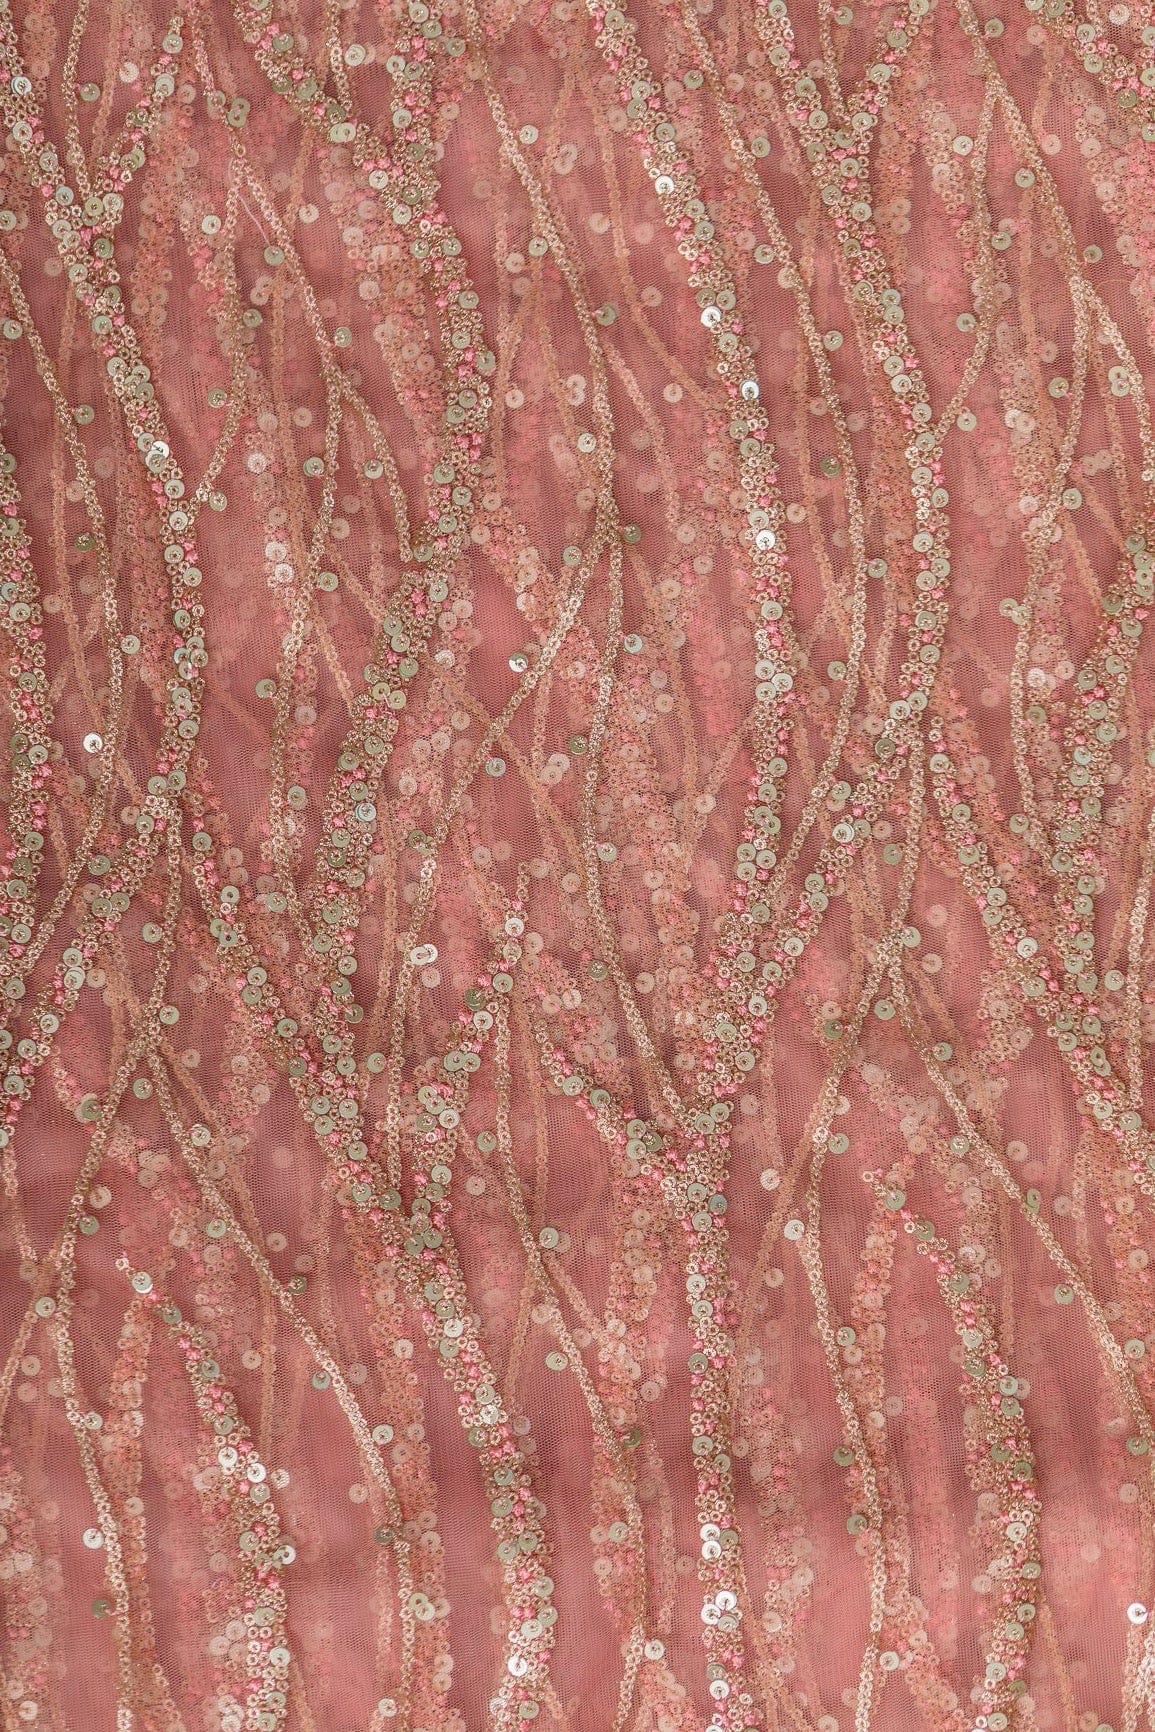 doeraa Embroidery Fabrics Gold And Silver Sequins With Baby Pink Thread Embroidery on Baby Pink Soft Net